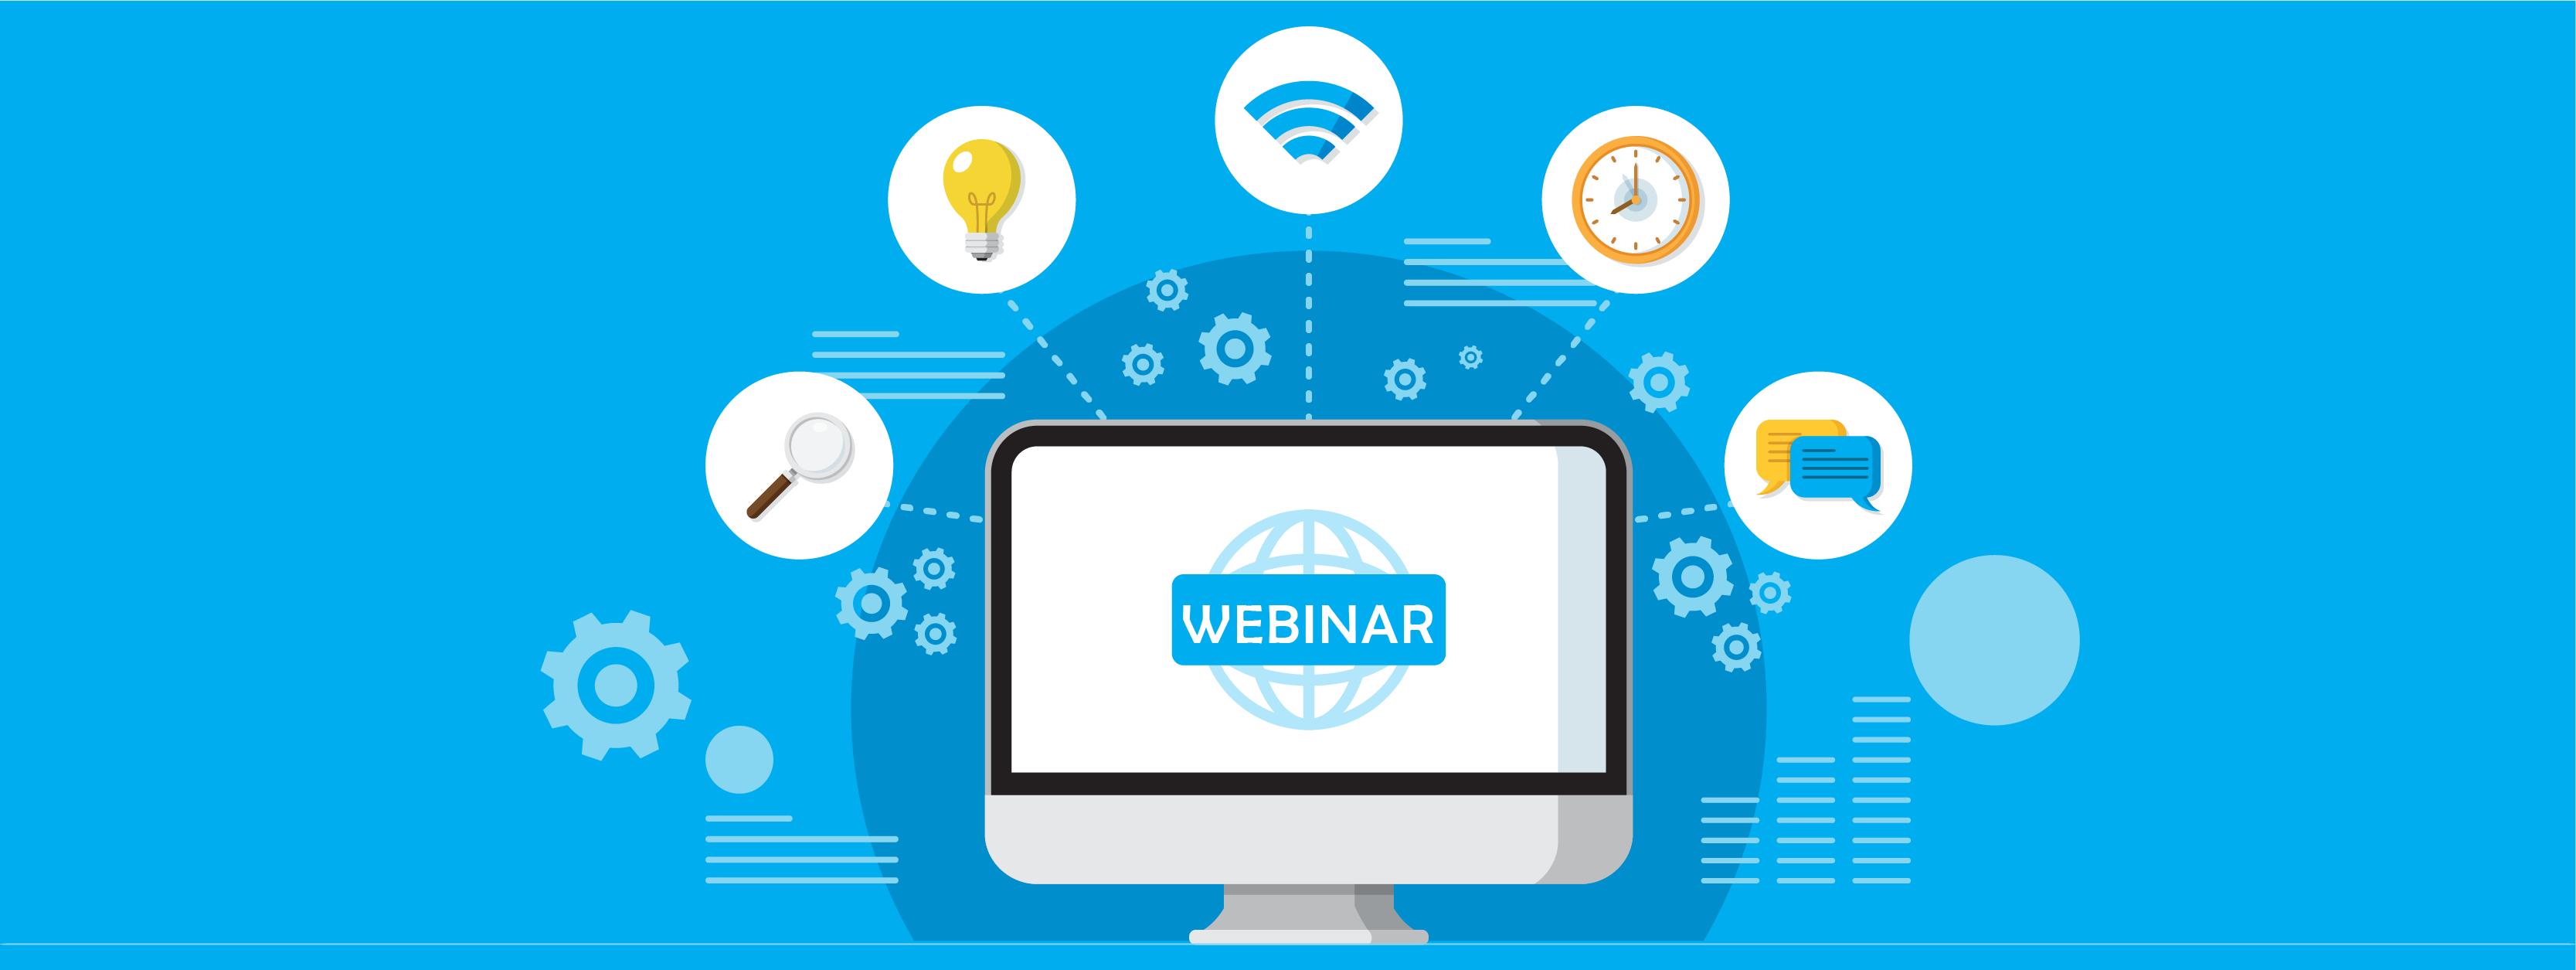 5 Tips for Webinars that Drive Registrations and Subscriptions